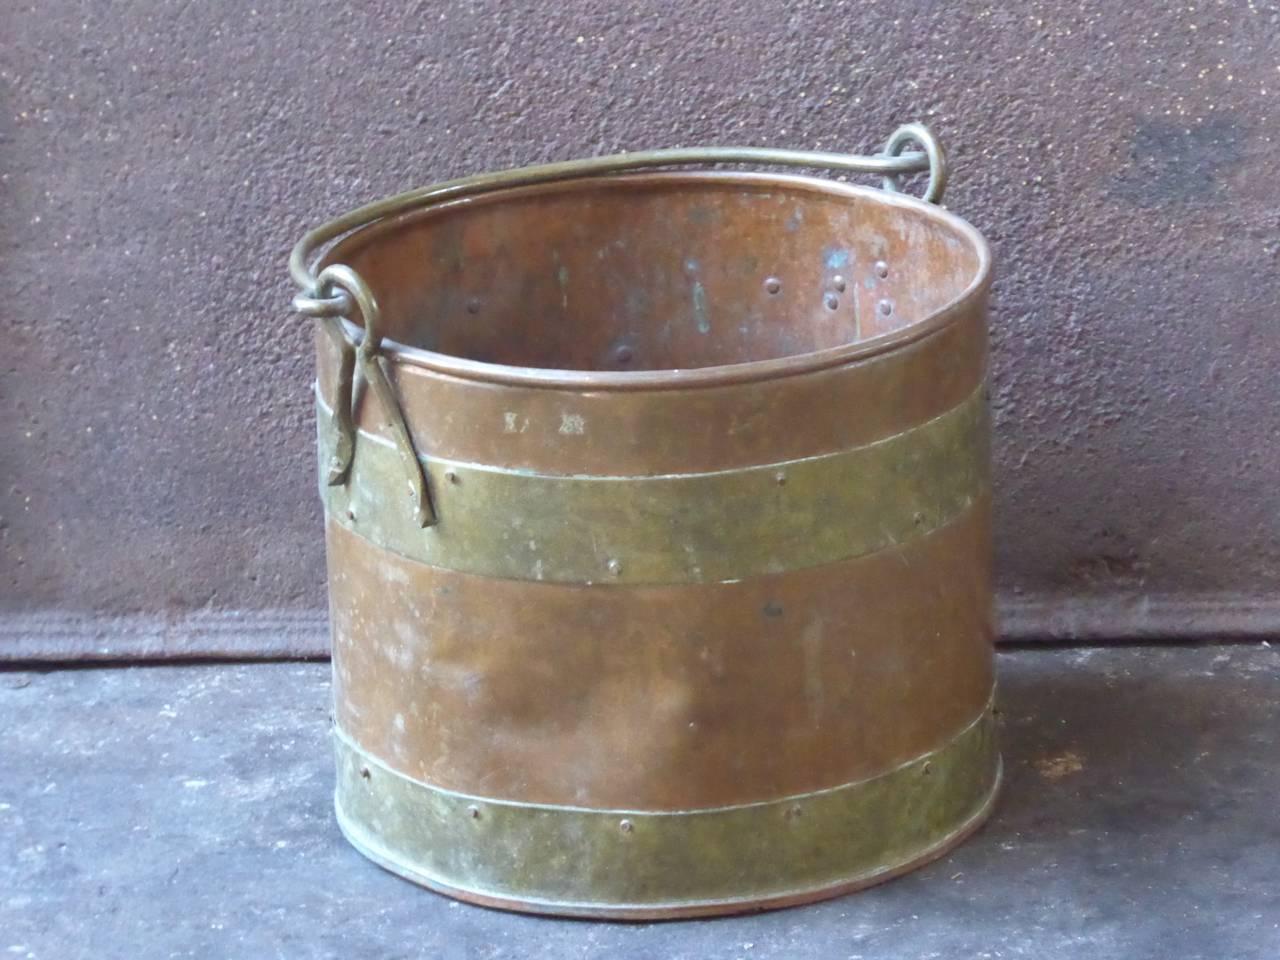 19th century Dutch log holder - log bin made of copper and brass.

We have a unique and specialized collection of antique and used fireplace accessories consisting of more than 1000 listings at 1stdibs. Amongst others, we always have 300+ firebacks,